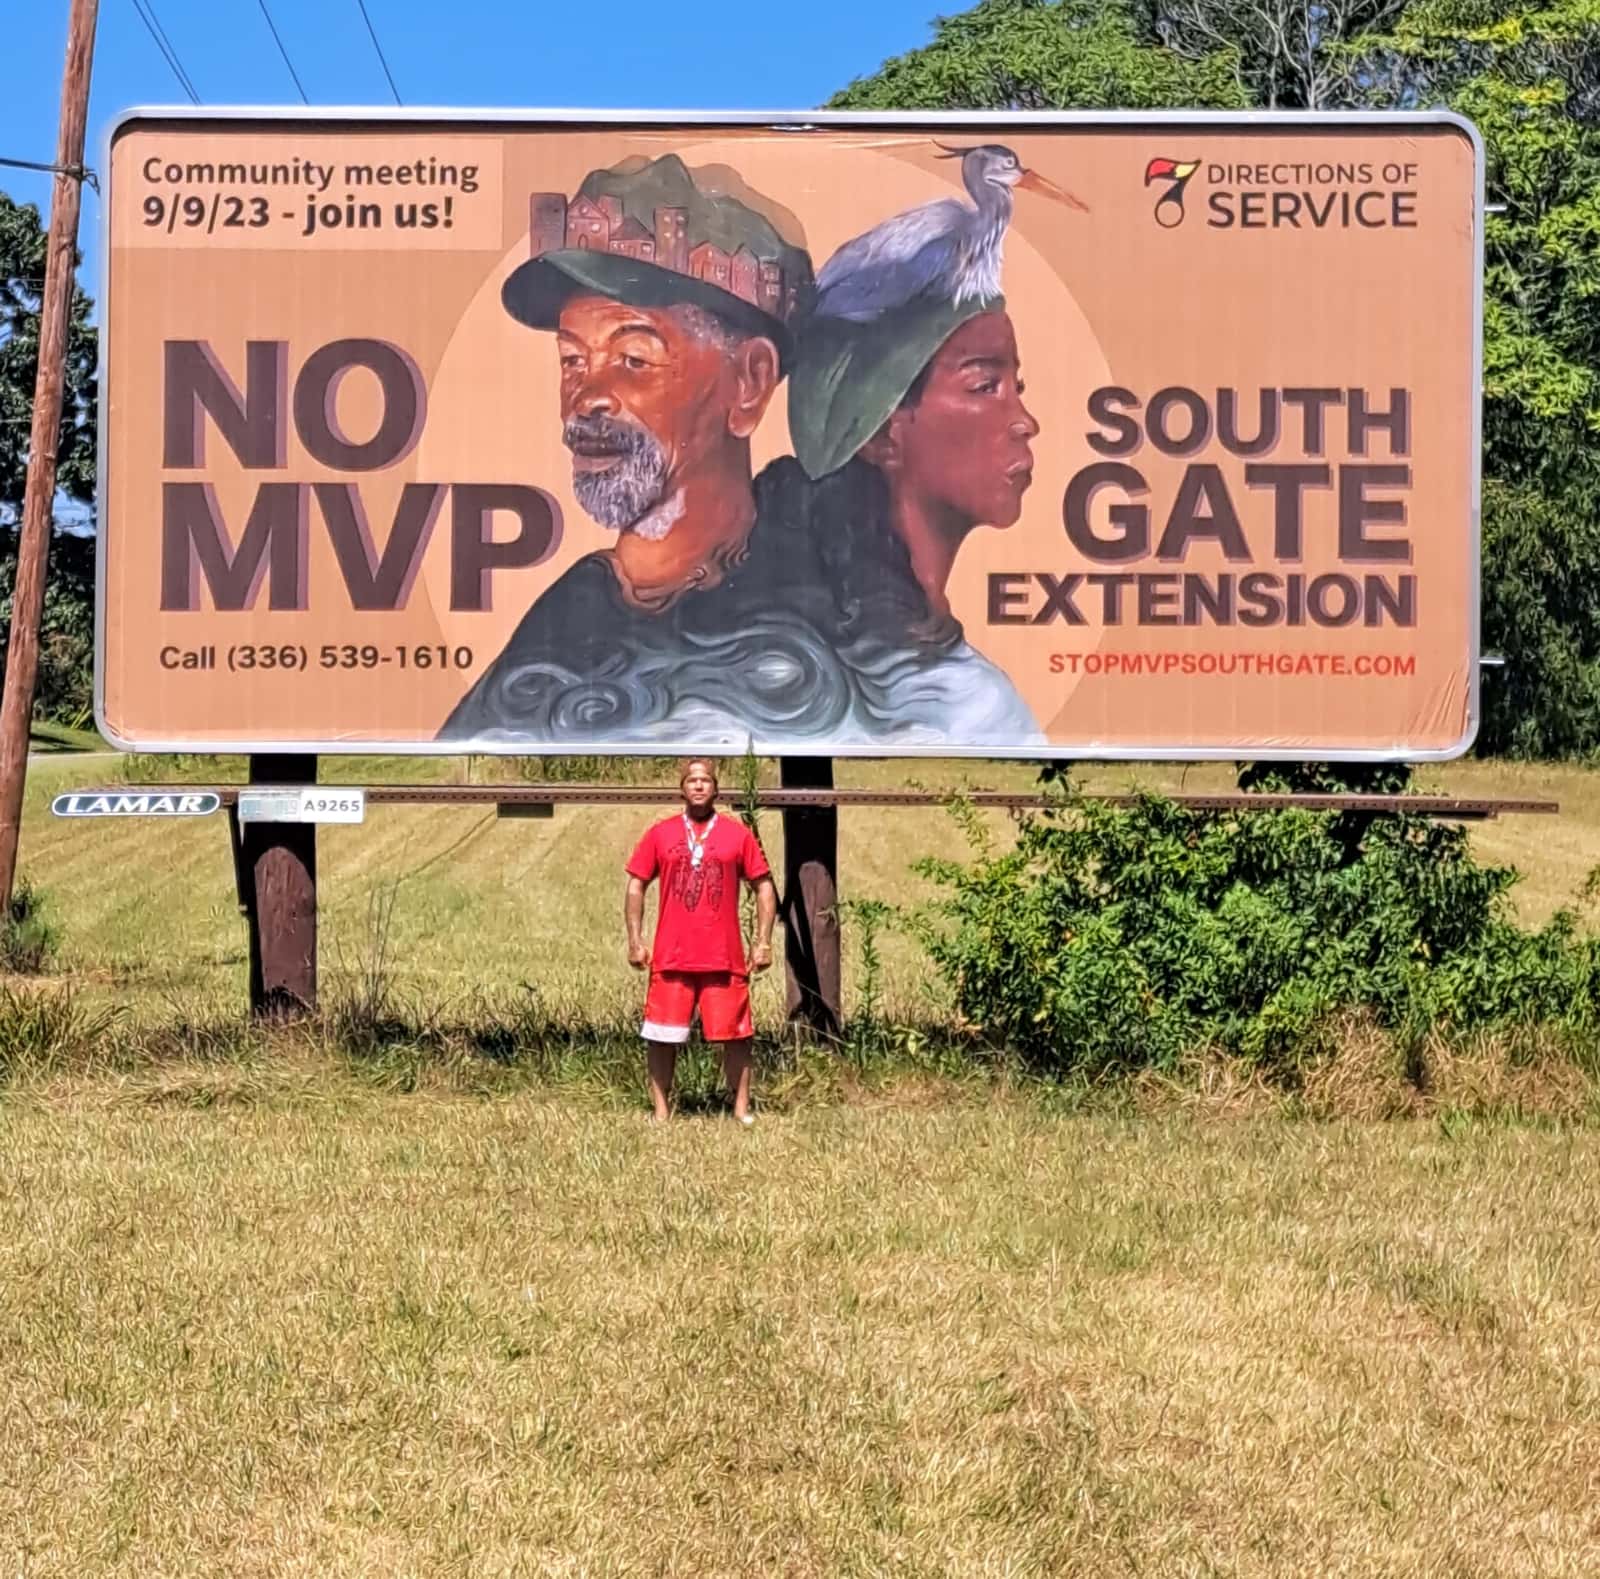 A man wearing a red frock standing in front of an outdoor billboard that reads "NO MVP SOUTH GATE EXTENSION"